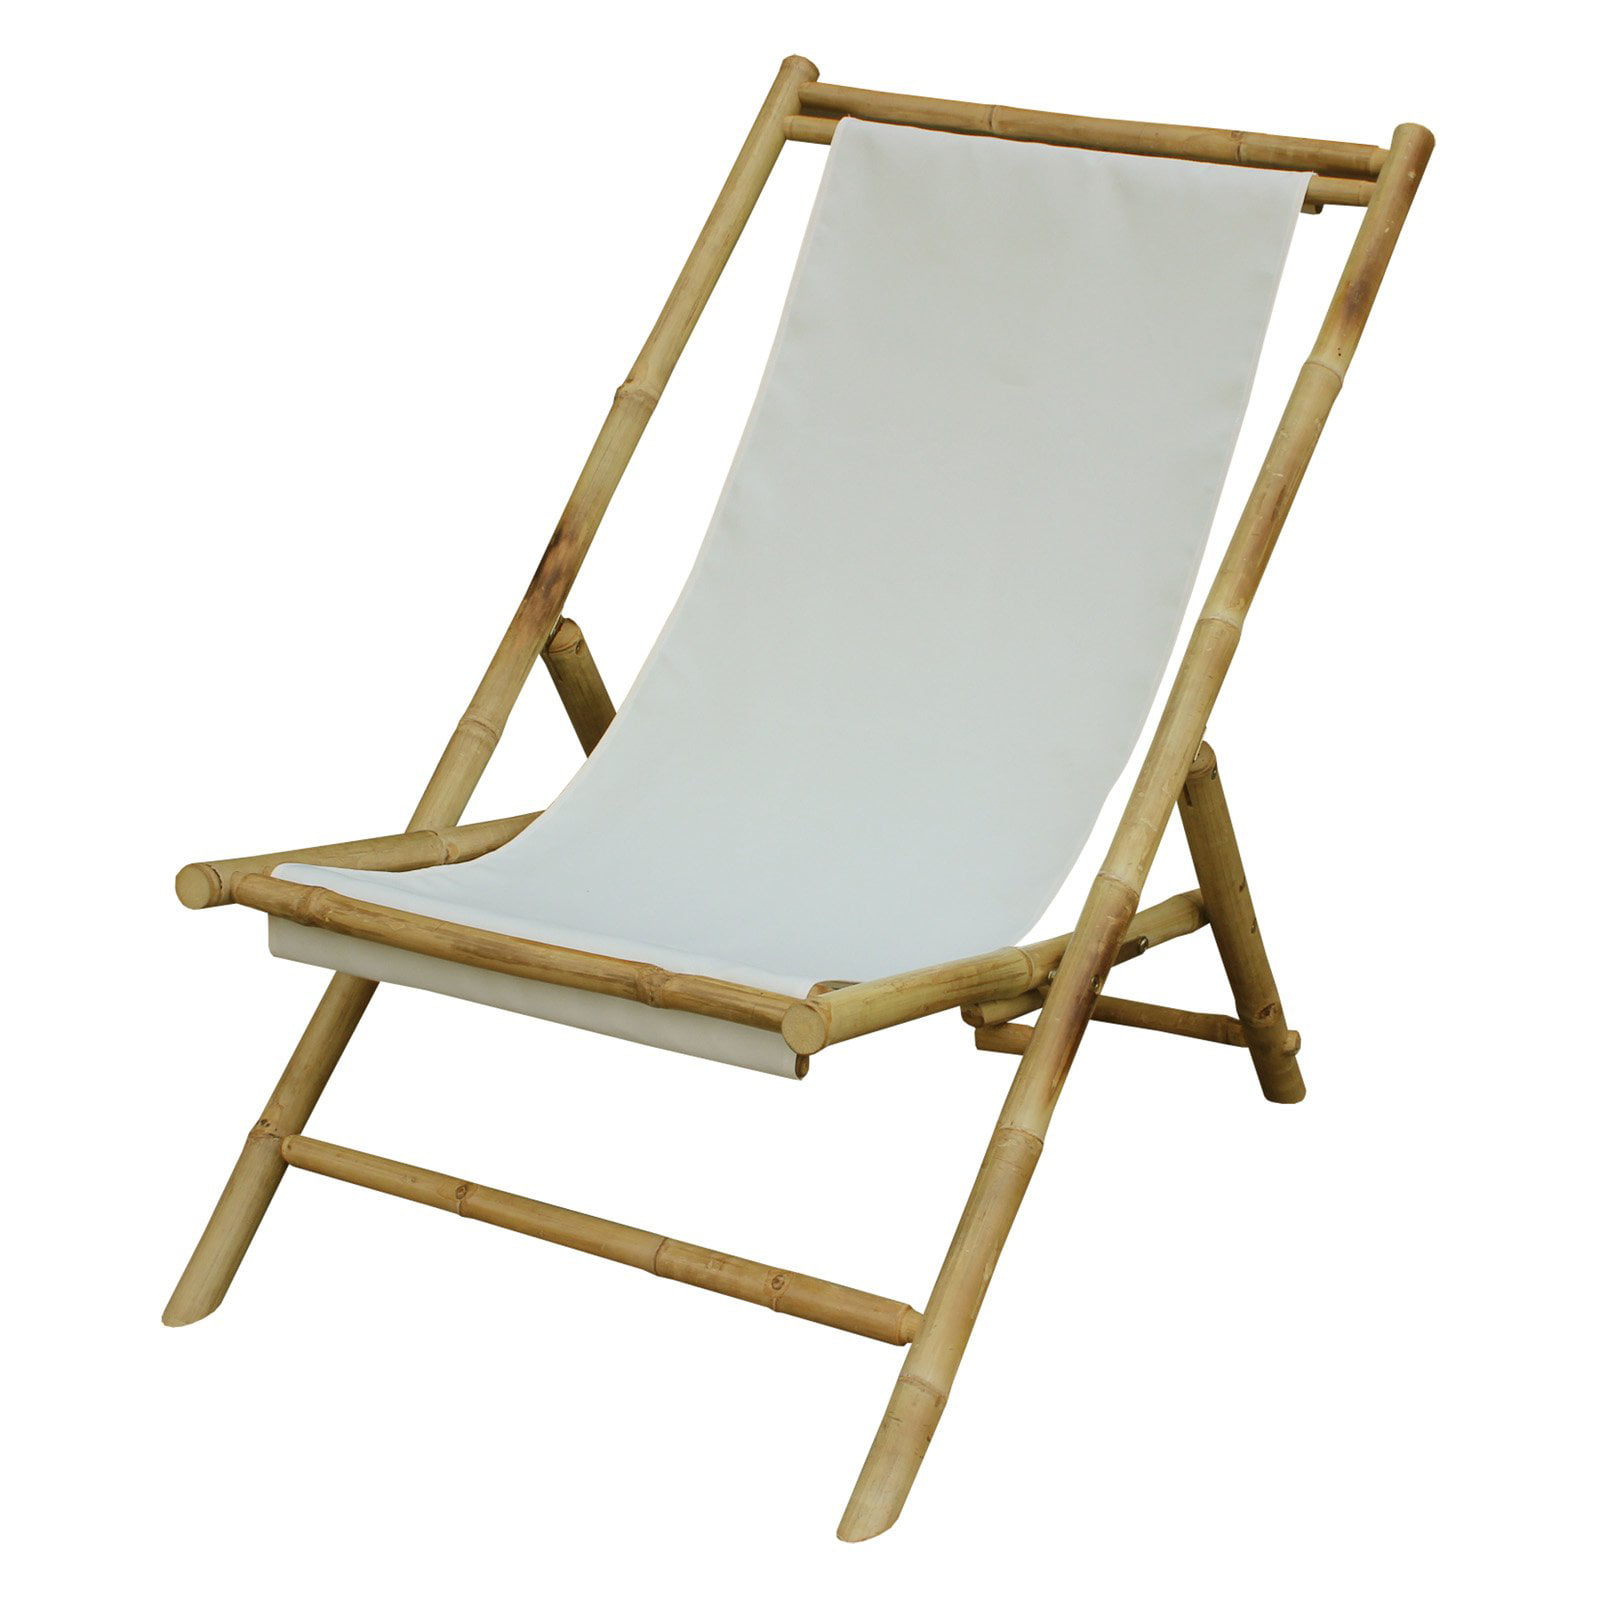 Statra CH-203-00.19 Folding Bamboo Relax Sling Chair-White Stripe Canvas 